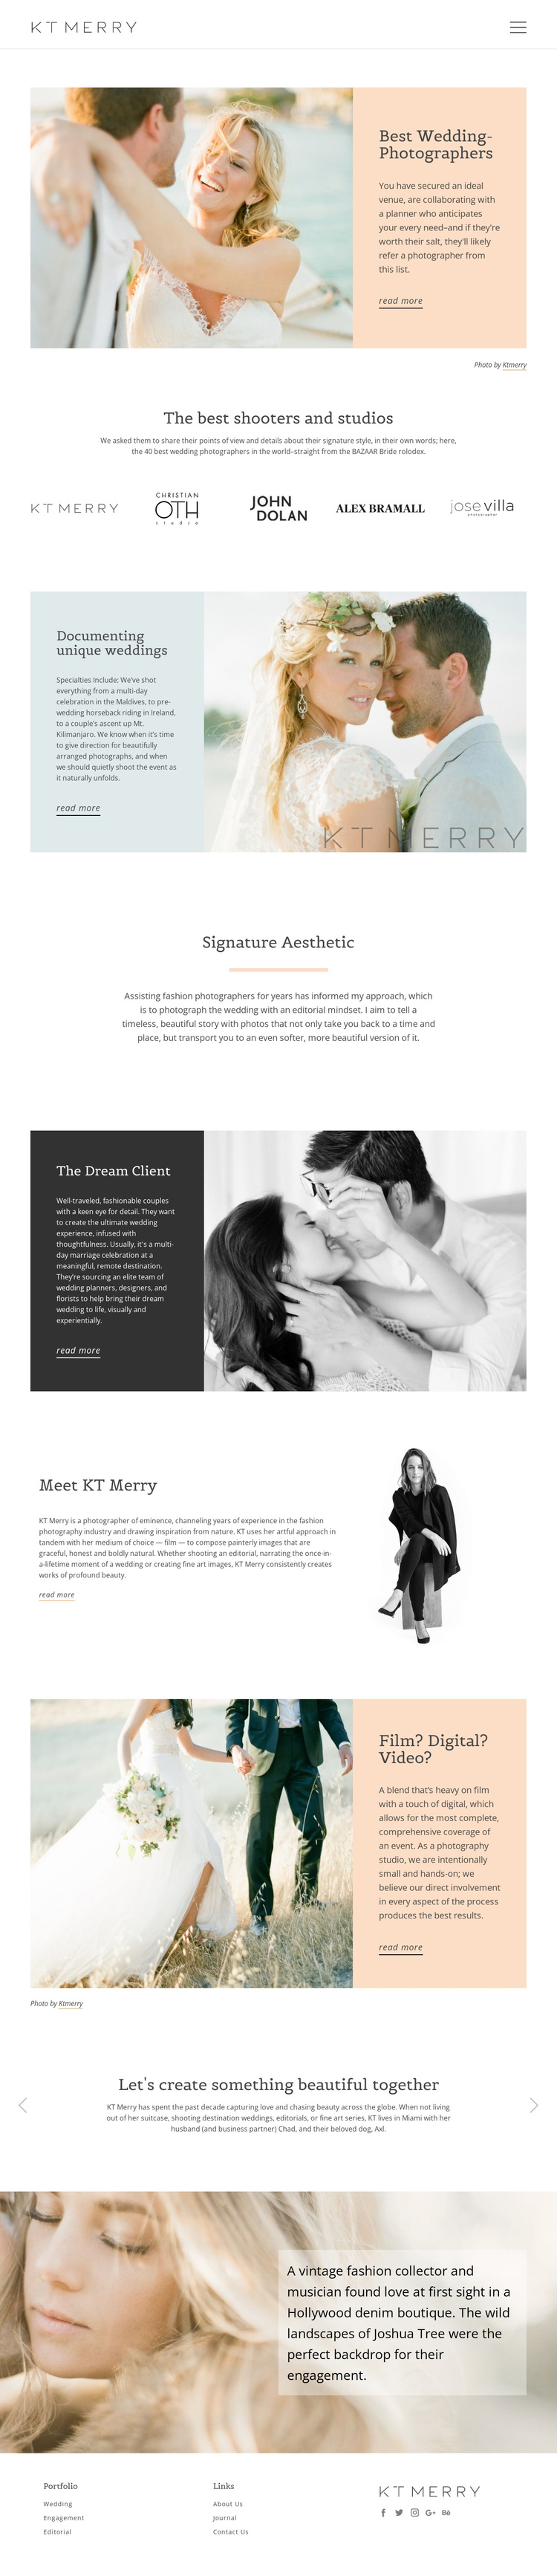 Shooters for special wedding Website Builder Software